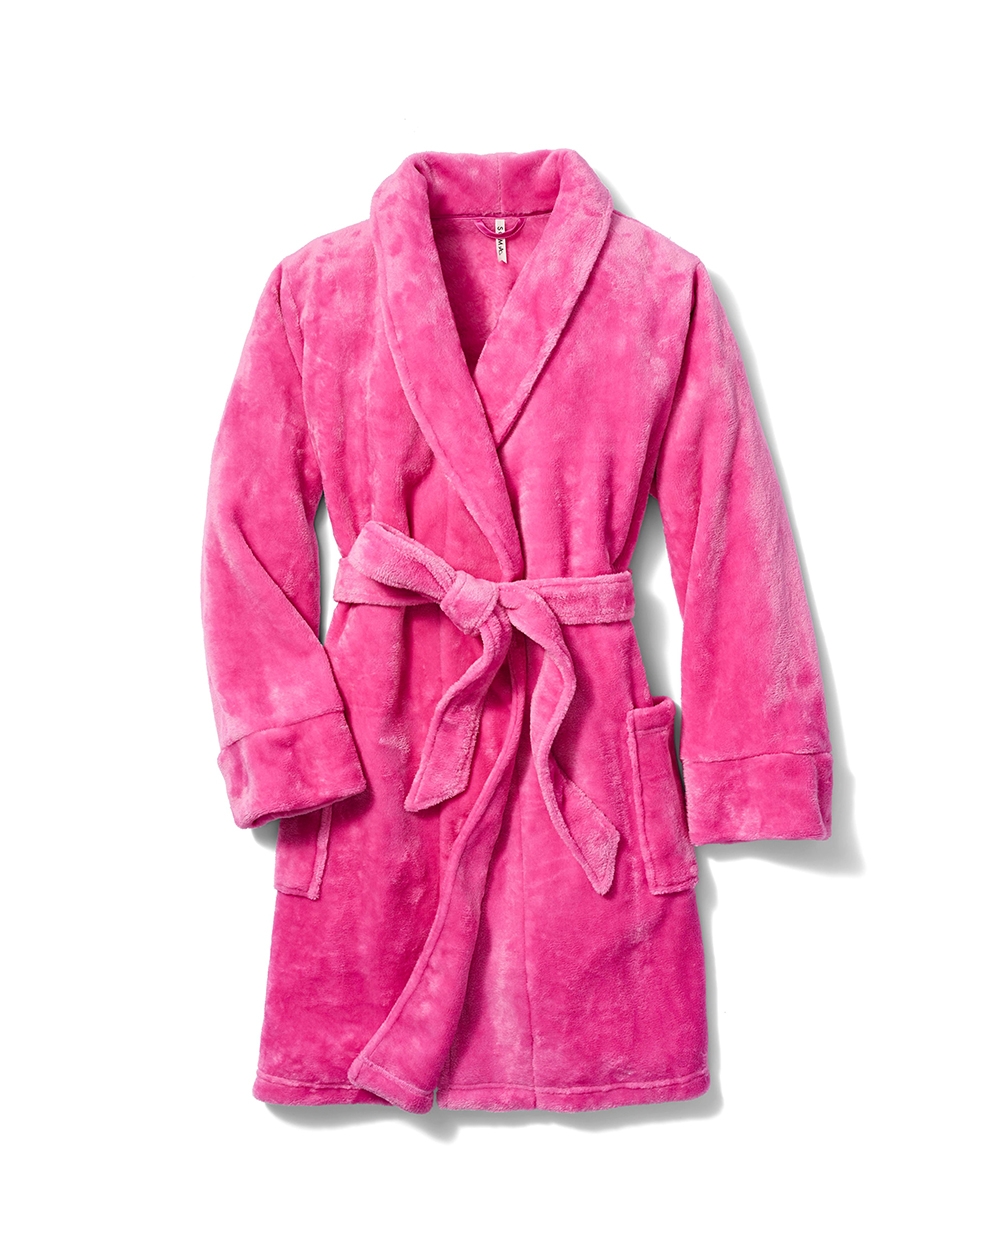 Soma<sup class=st-superscript>®</sup> laydown of pink plush robe.